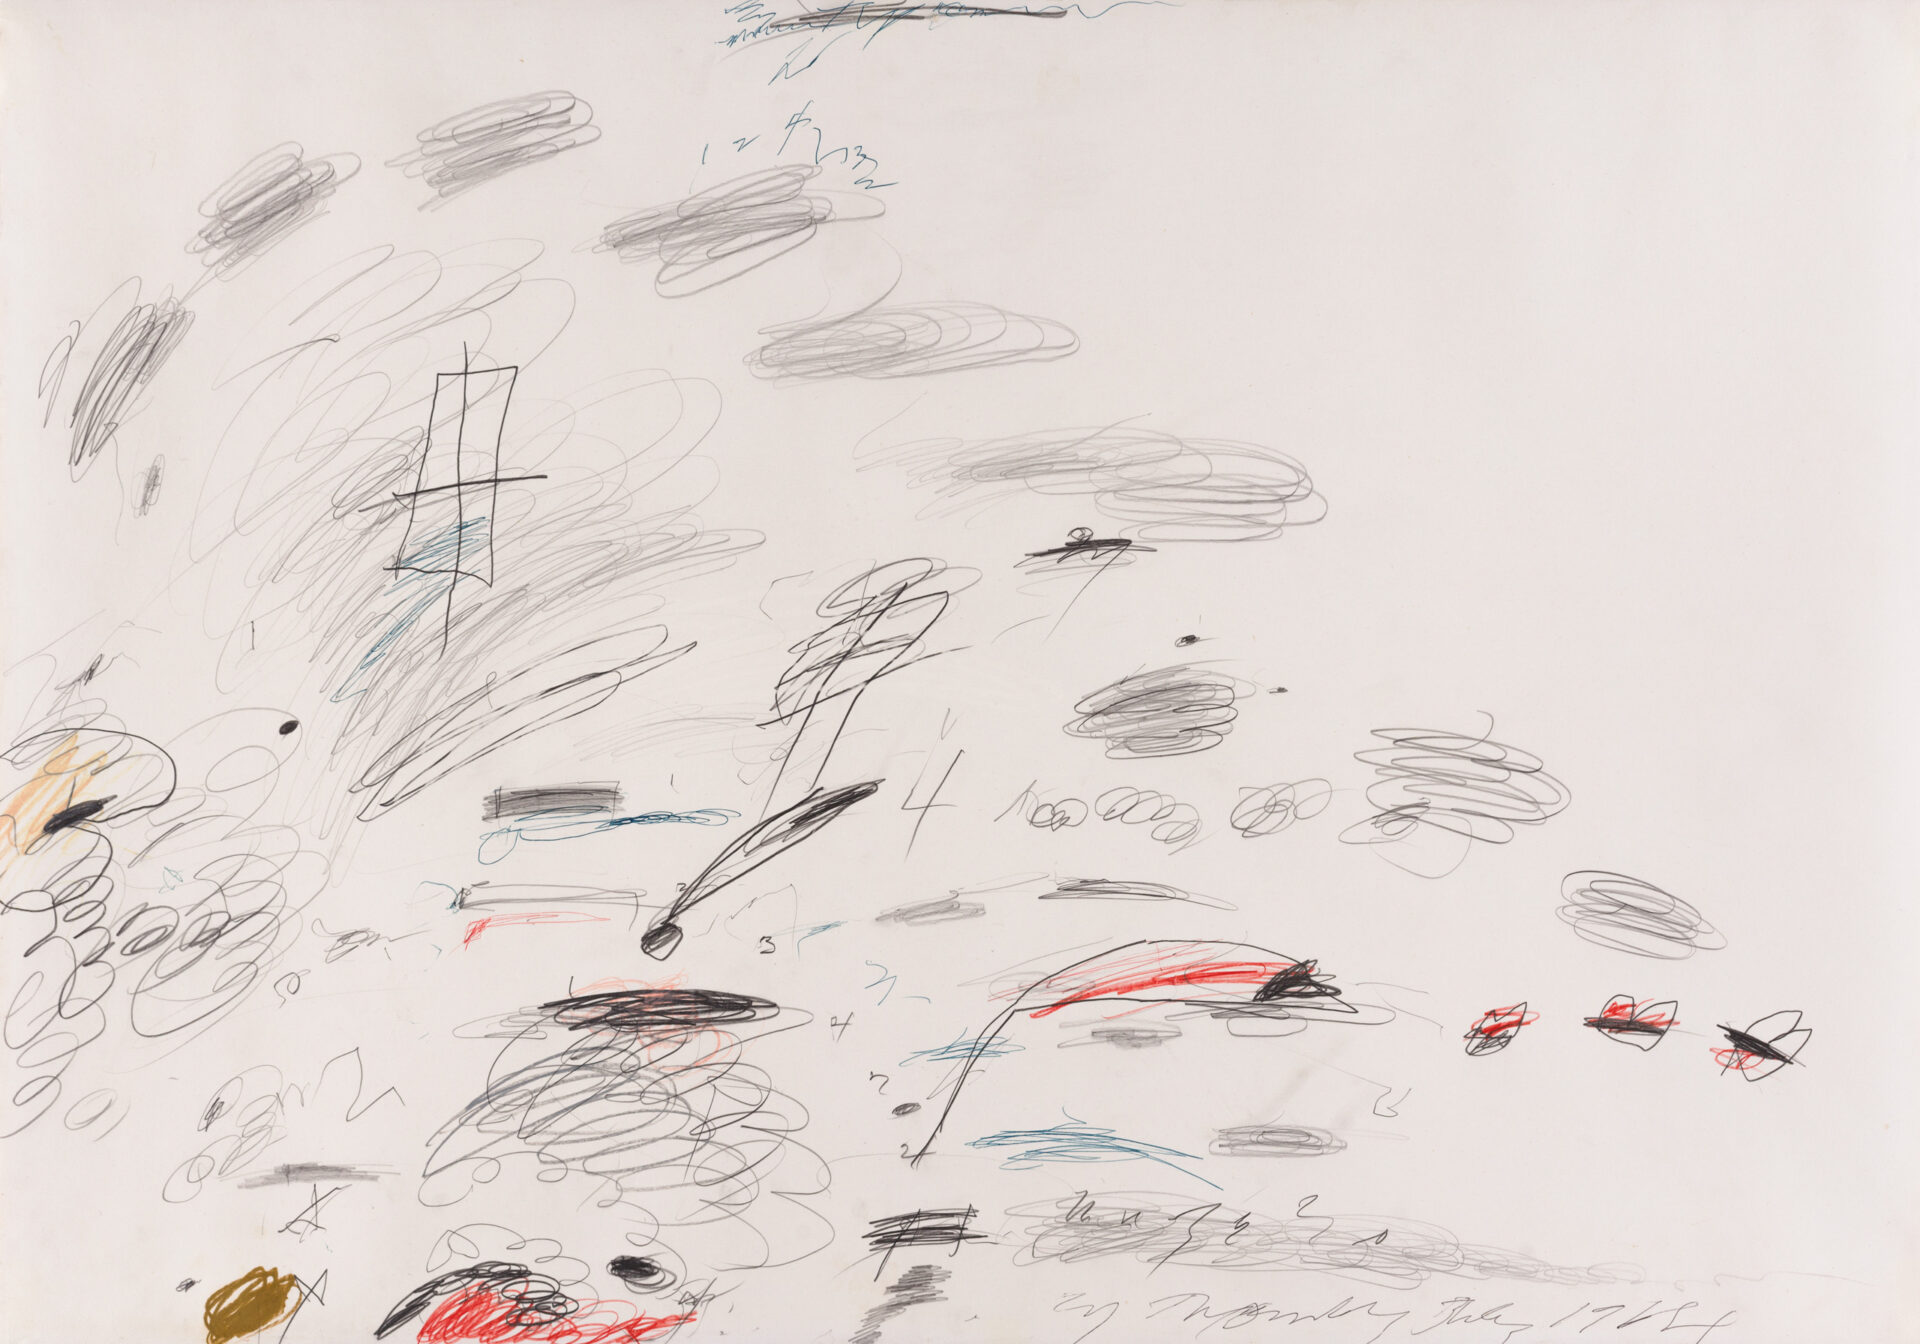 Cy Twombly, Ohne Titel, 1964, Städel Museum, Frankfurt am Main, © Cy Twombly Foundation